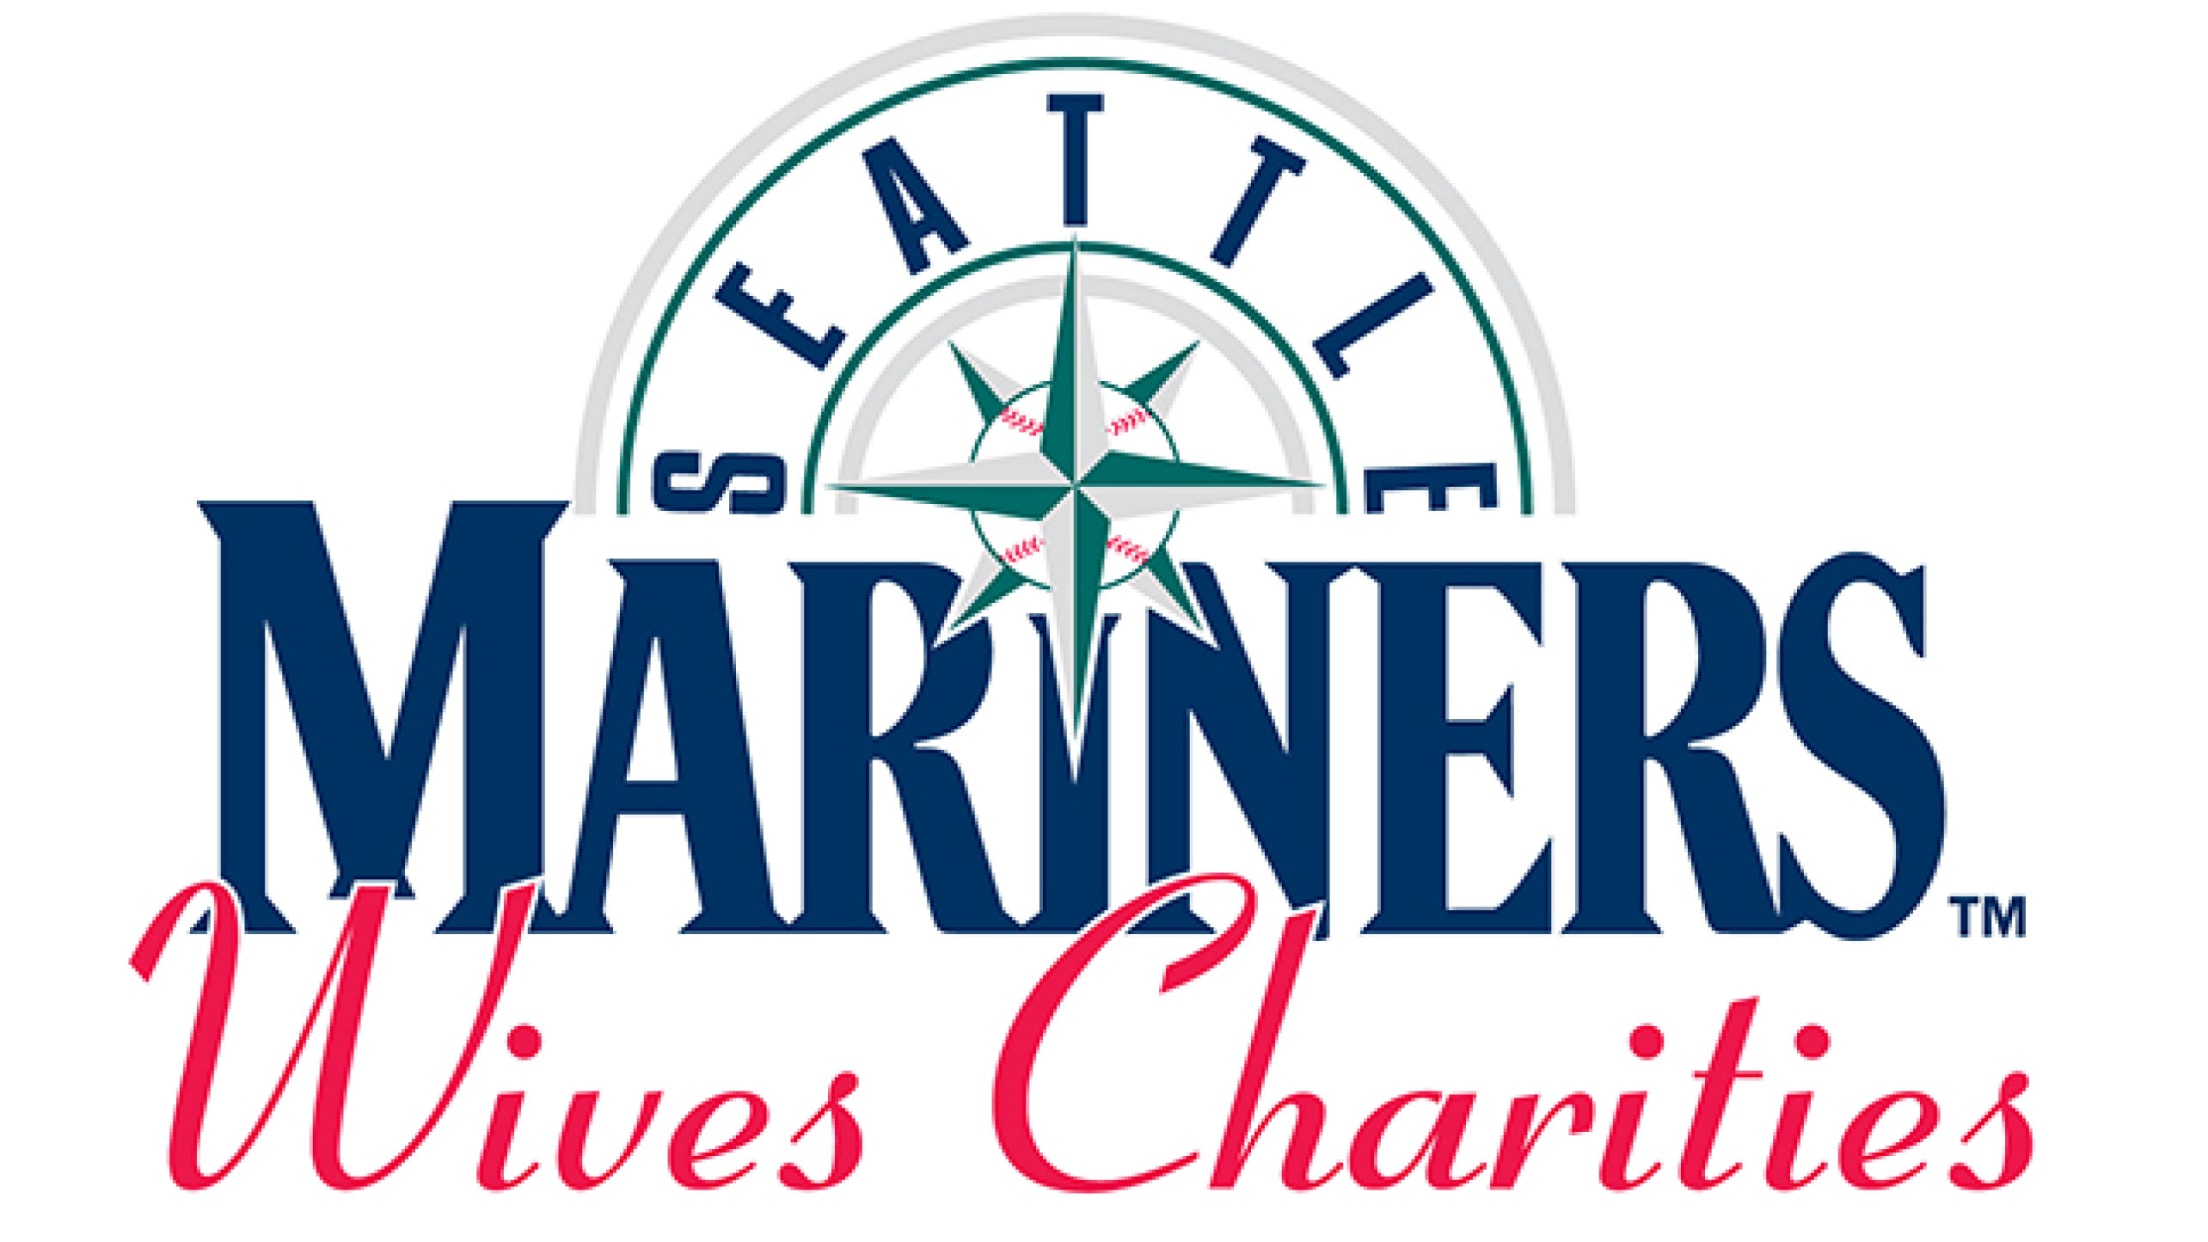 Mariners Families Favorite Things Basket Auction